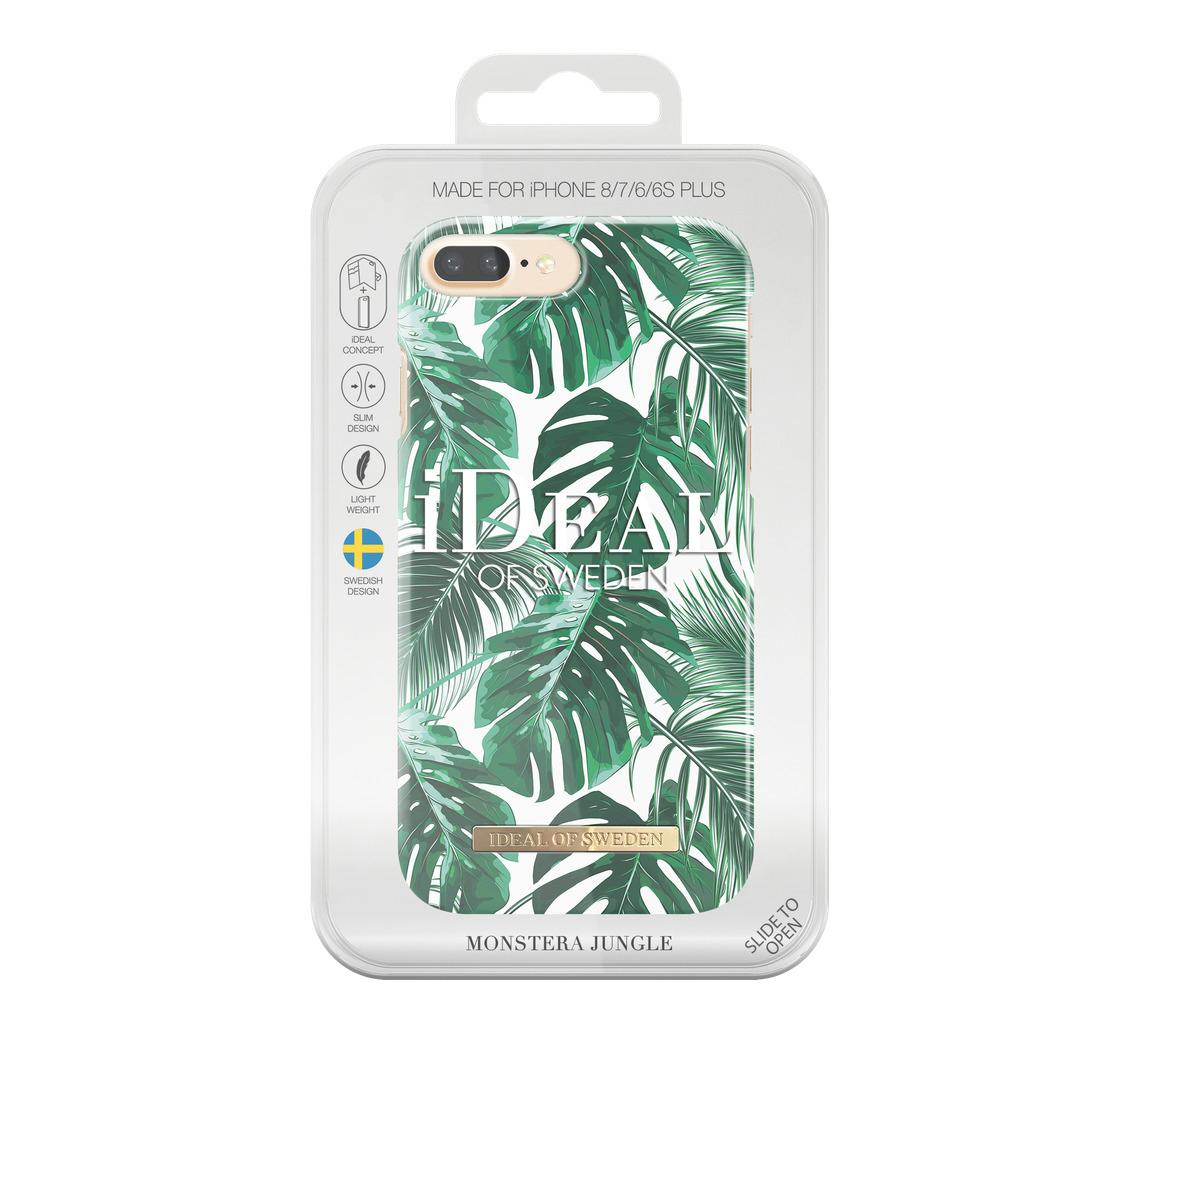 Jungle 8 Backcover, SWEDEN OF Monstera iPhone Fashion, iPhone ,iPhone Plus, 7 IDEAL Apple, 6 Plus, Plus